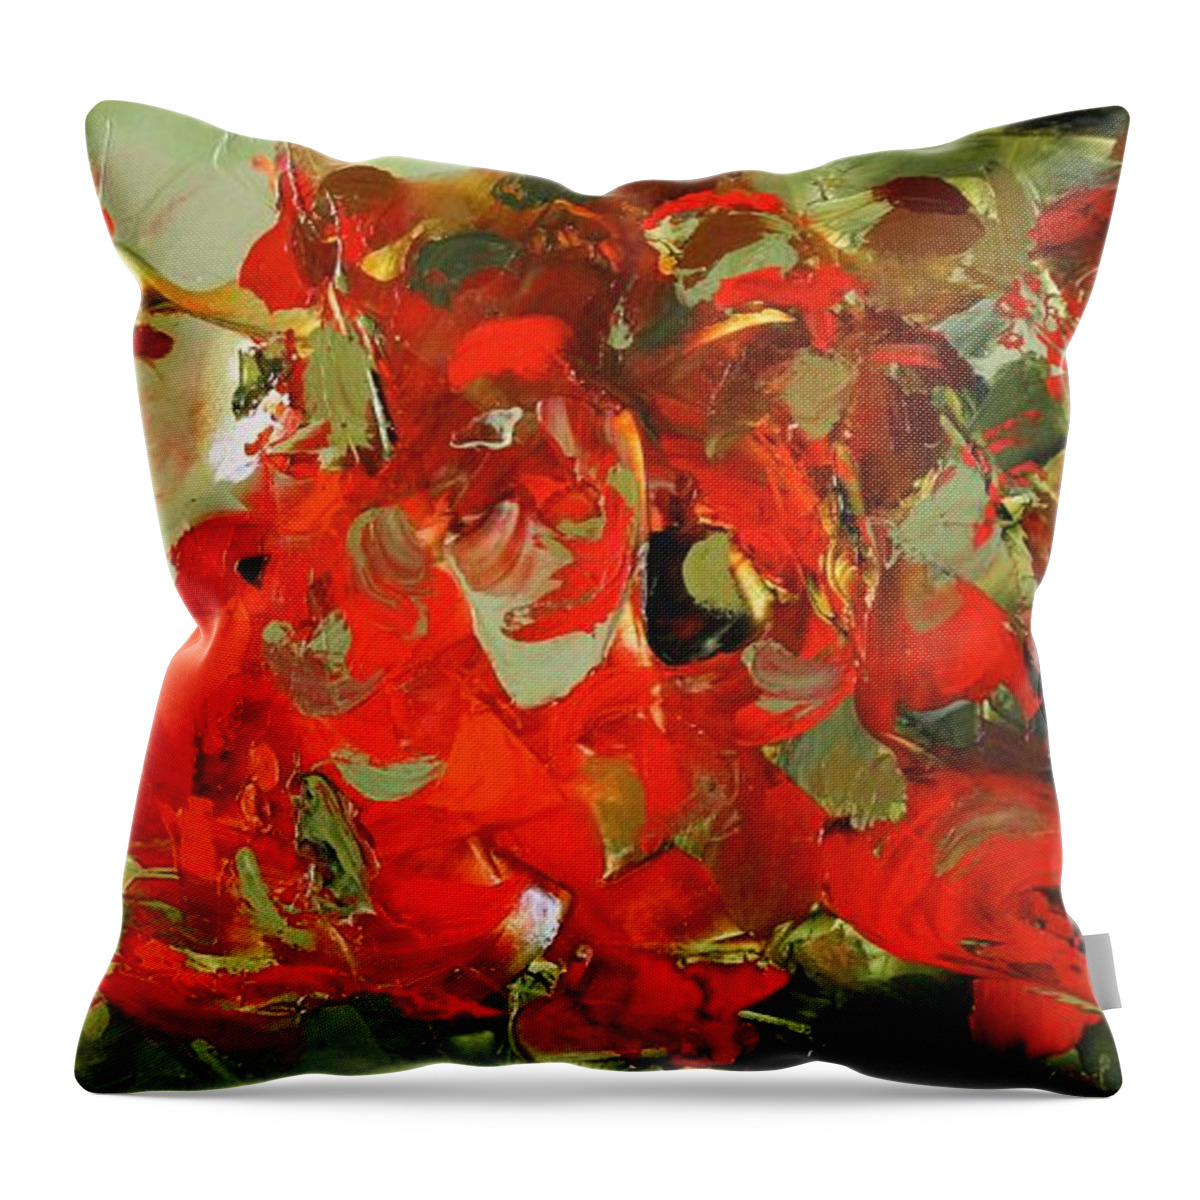 Green And Orange Abstract Throw Pillow featuring the painting Desire by Preethi Mathialagan